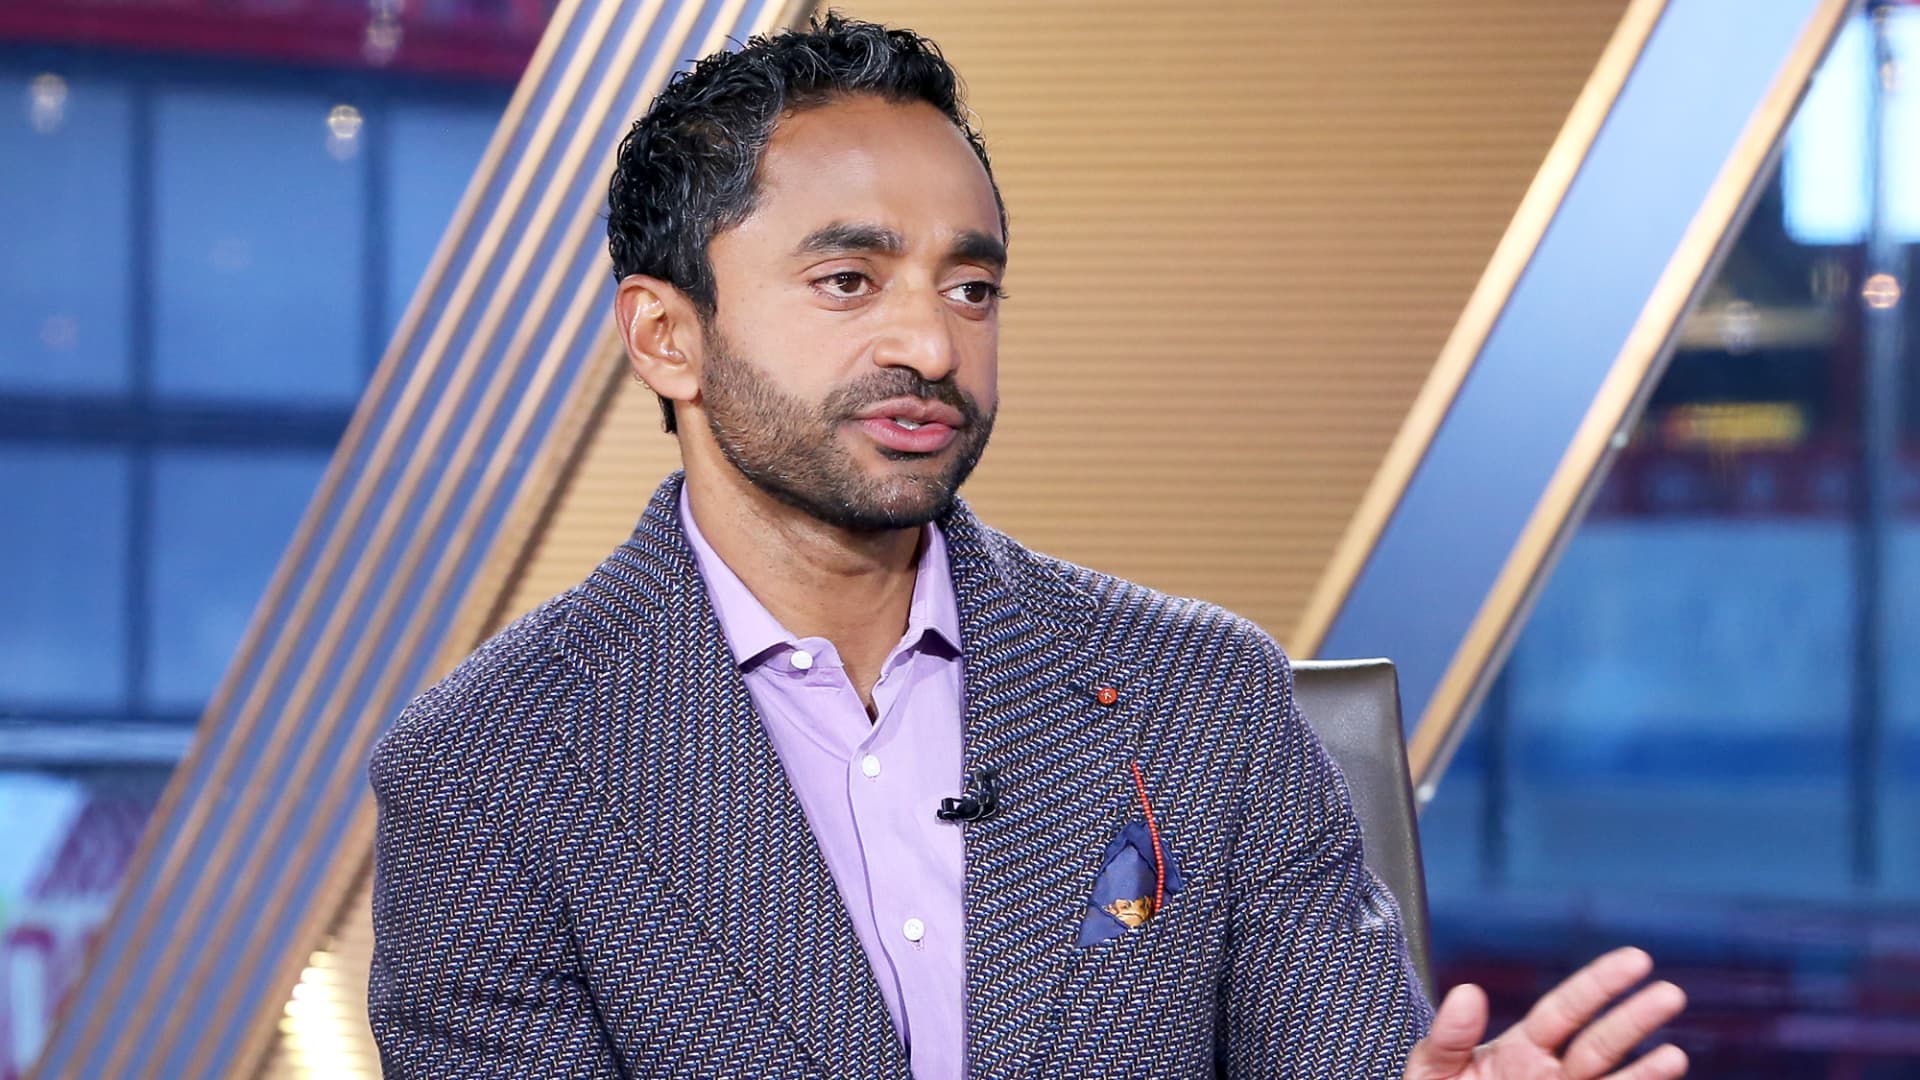 Palihapitiya finds next '10x idea' with $4.8 billion SPAC deal for real estate start-up Opendoor